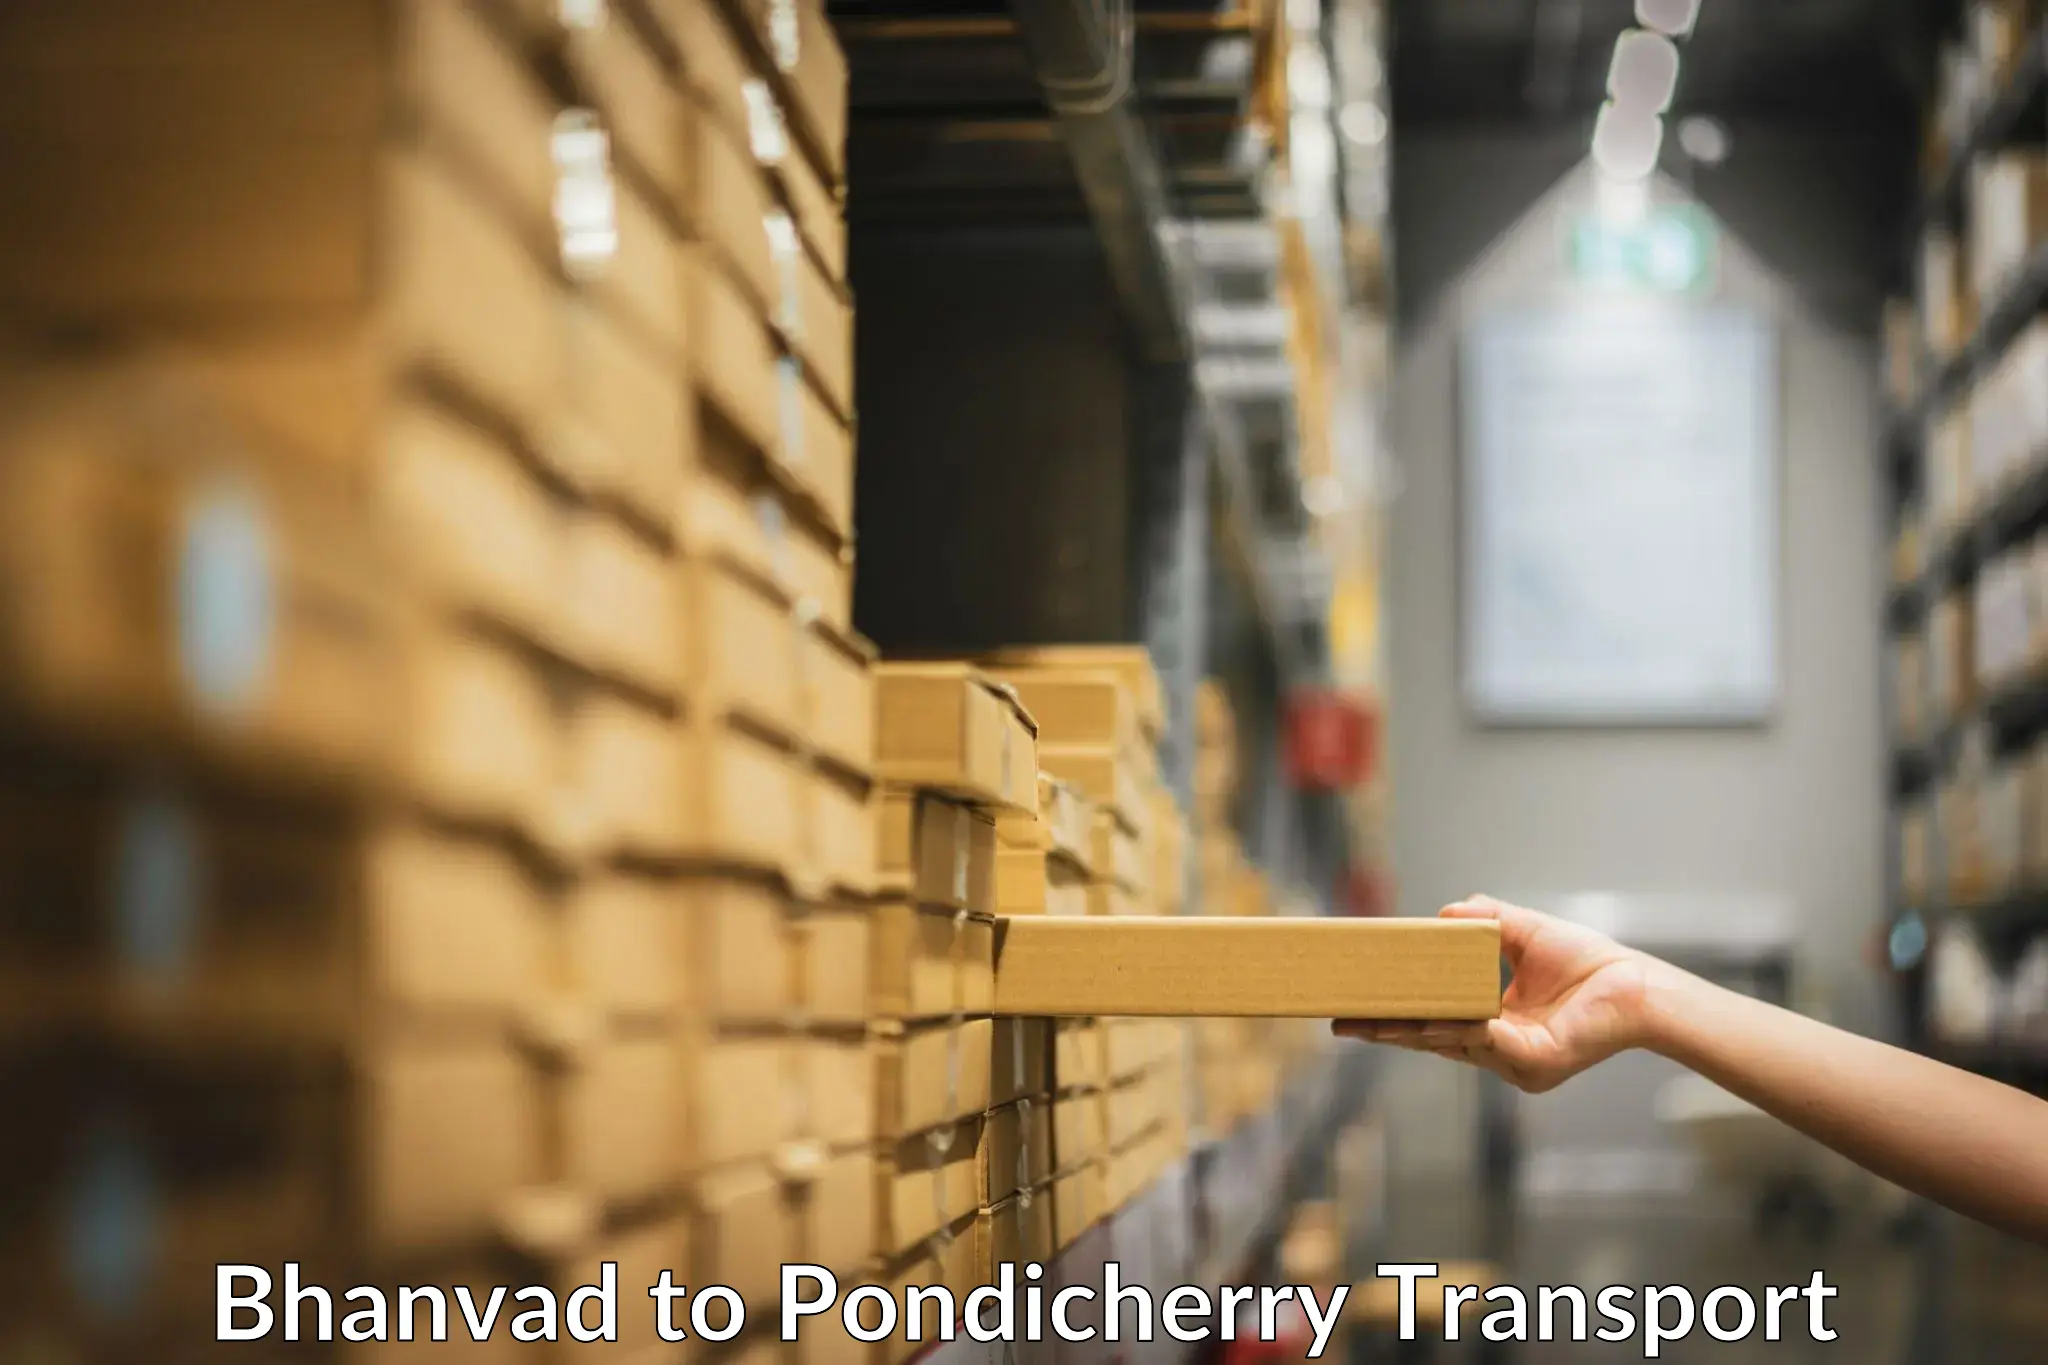 Air freight transport services Bhanvad to Pondicherry University